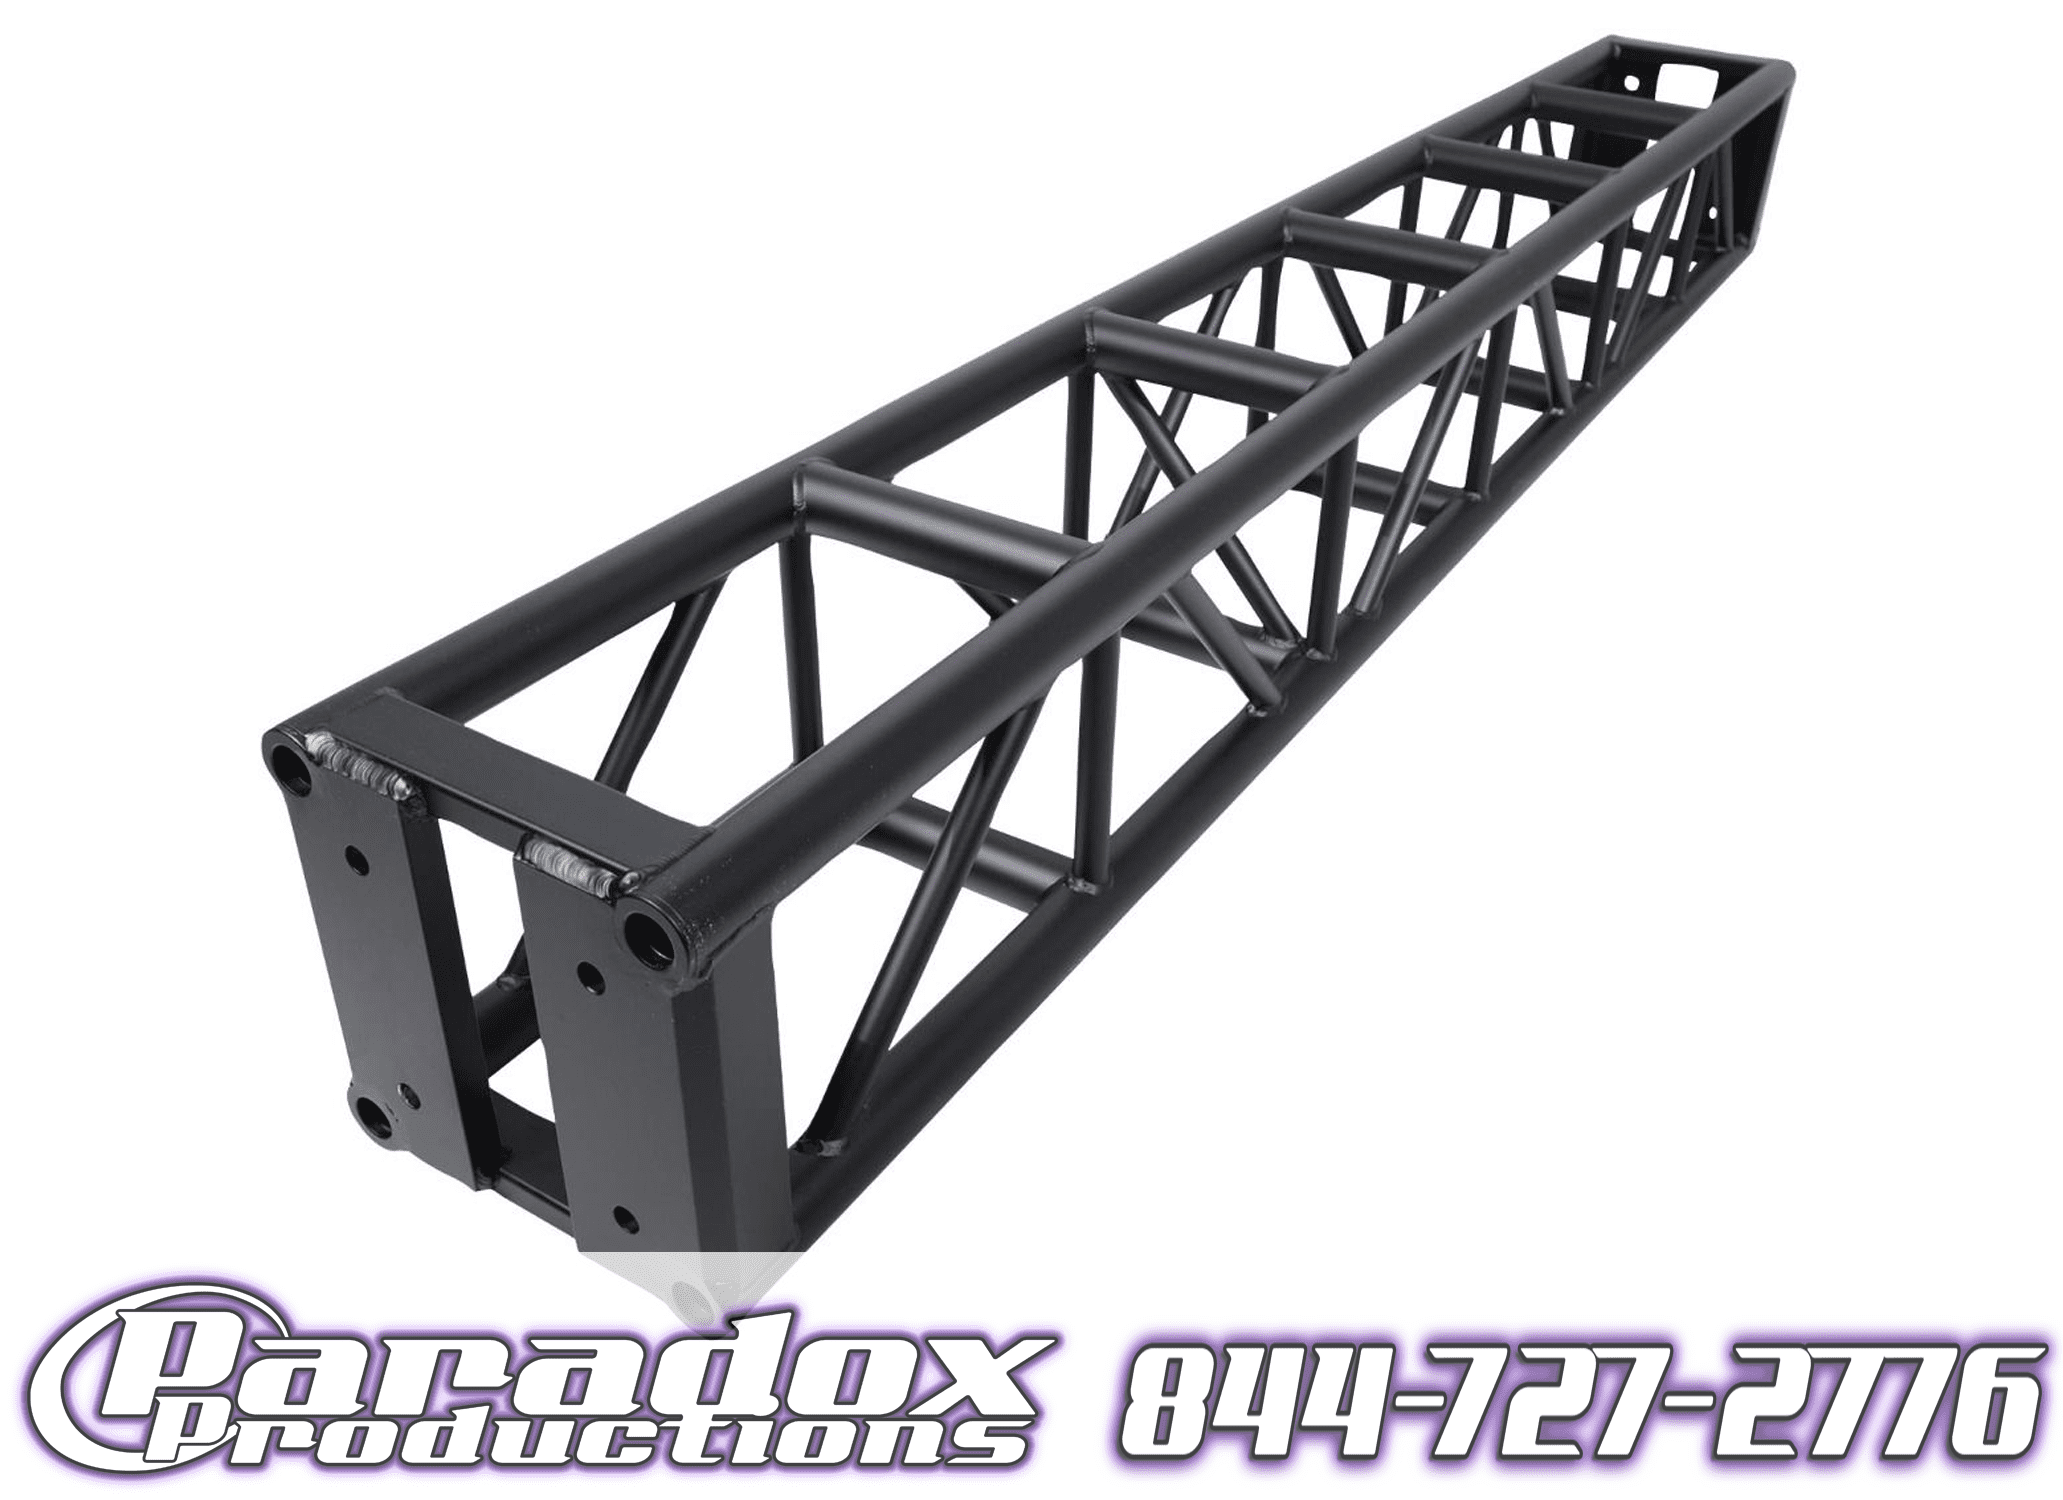 A black 12" Box Truss - 10' - Black with a white background.